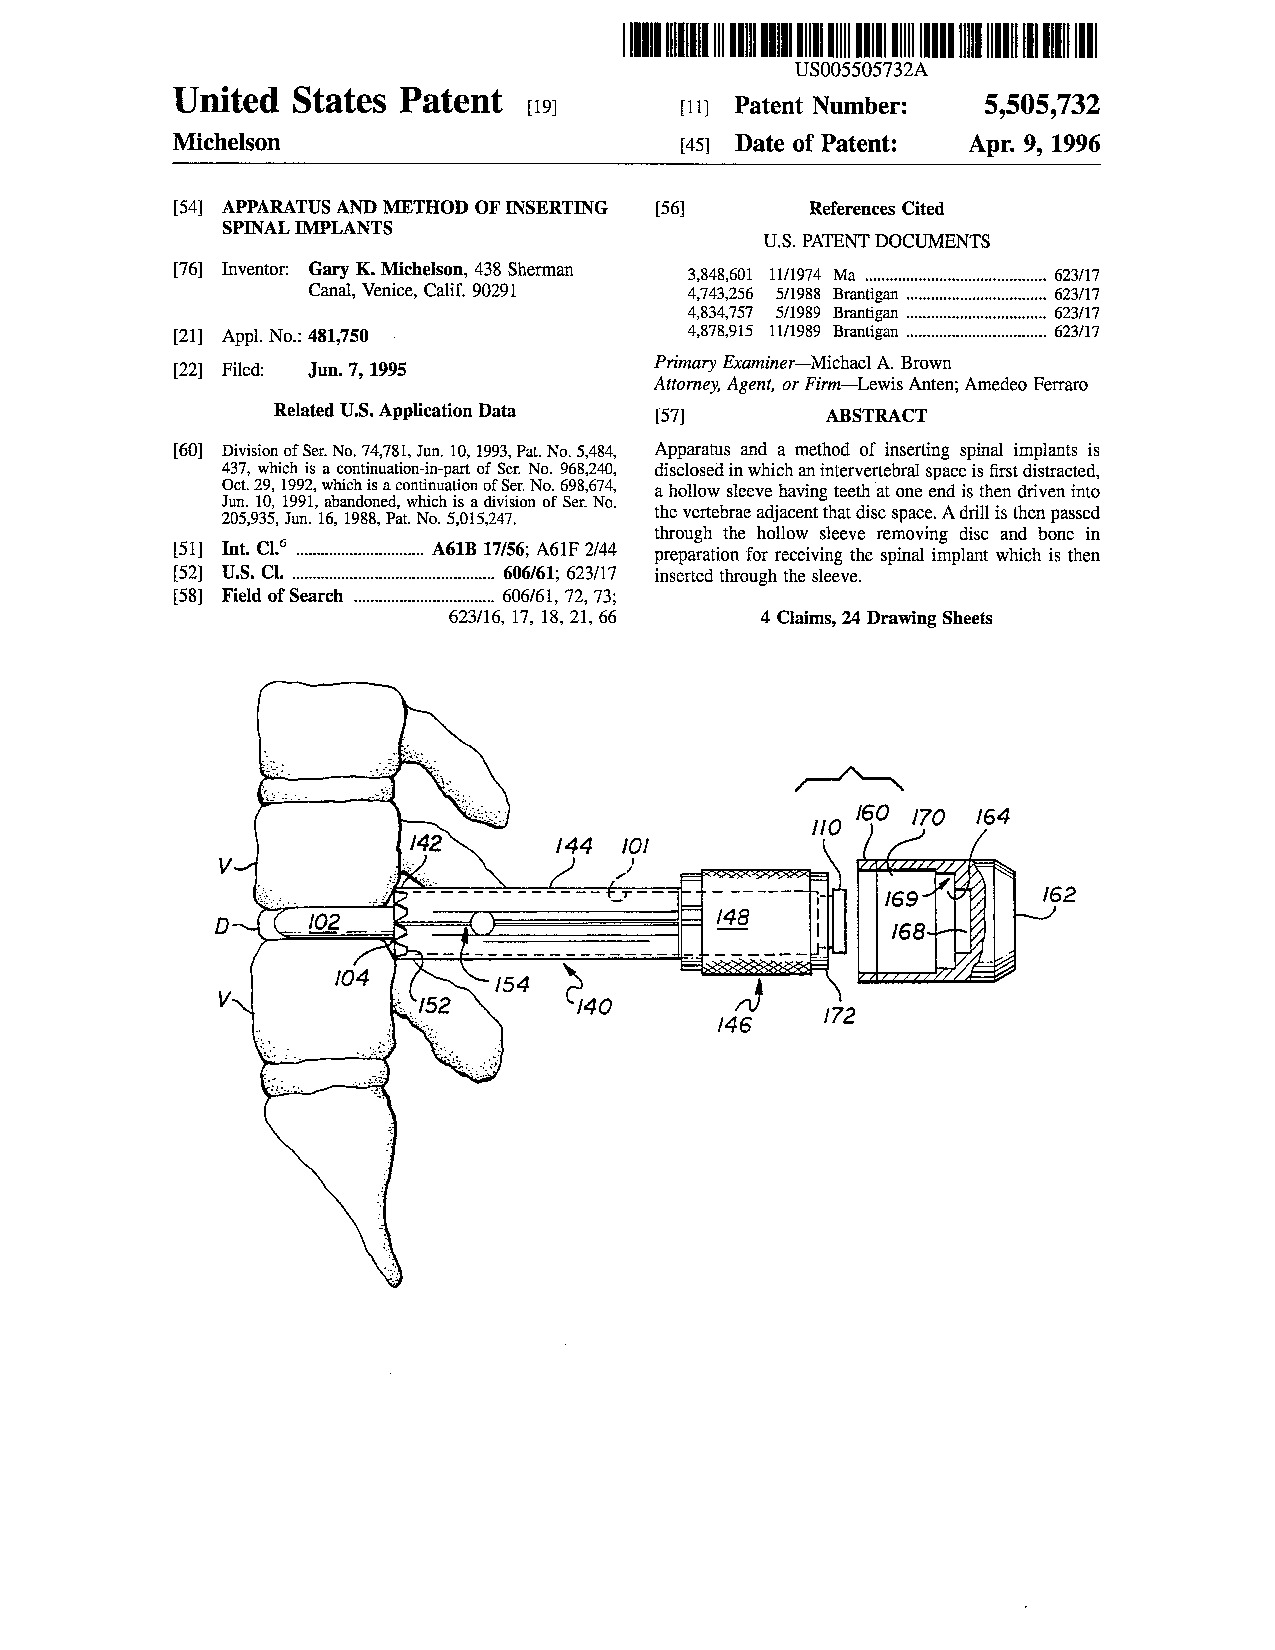 Apparatus and method of inserting spinal implants - Patent 5,505,732